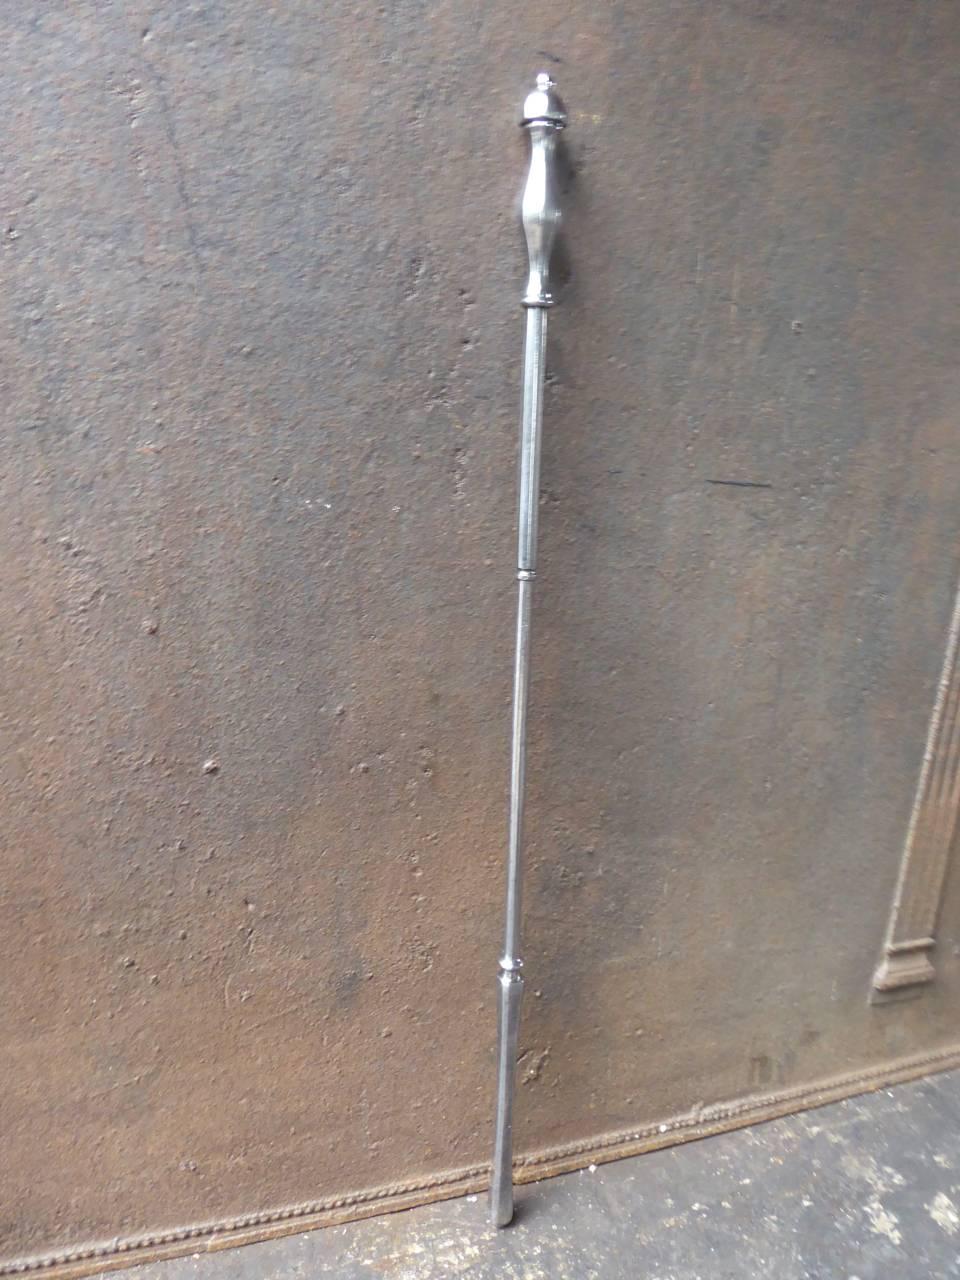 19th century English fireplace poker made of polished steel.

We have a unique and specialized collection of antique and used fireplace accessories consisting of more than 1000 listings at 1stdibs. Amongst others we always have 300+ firebacks, 250+